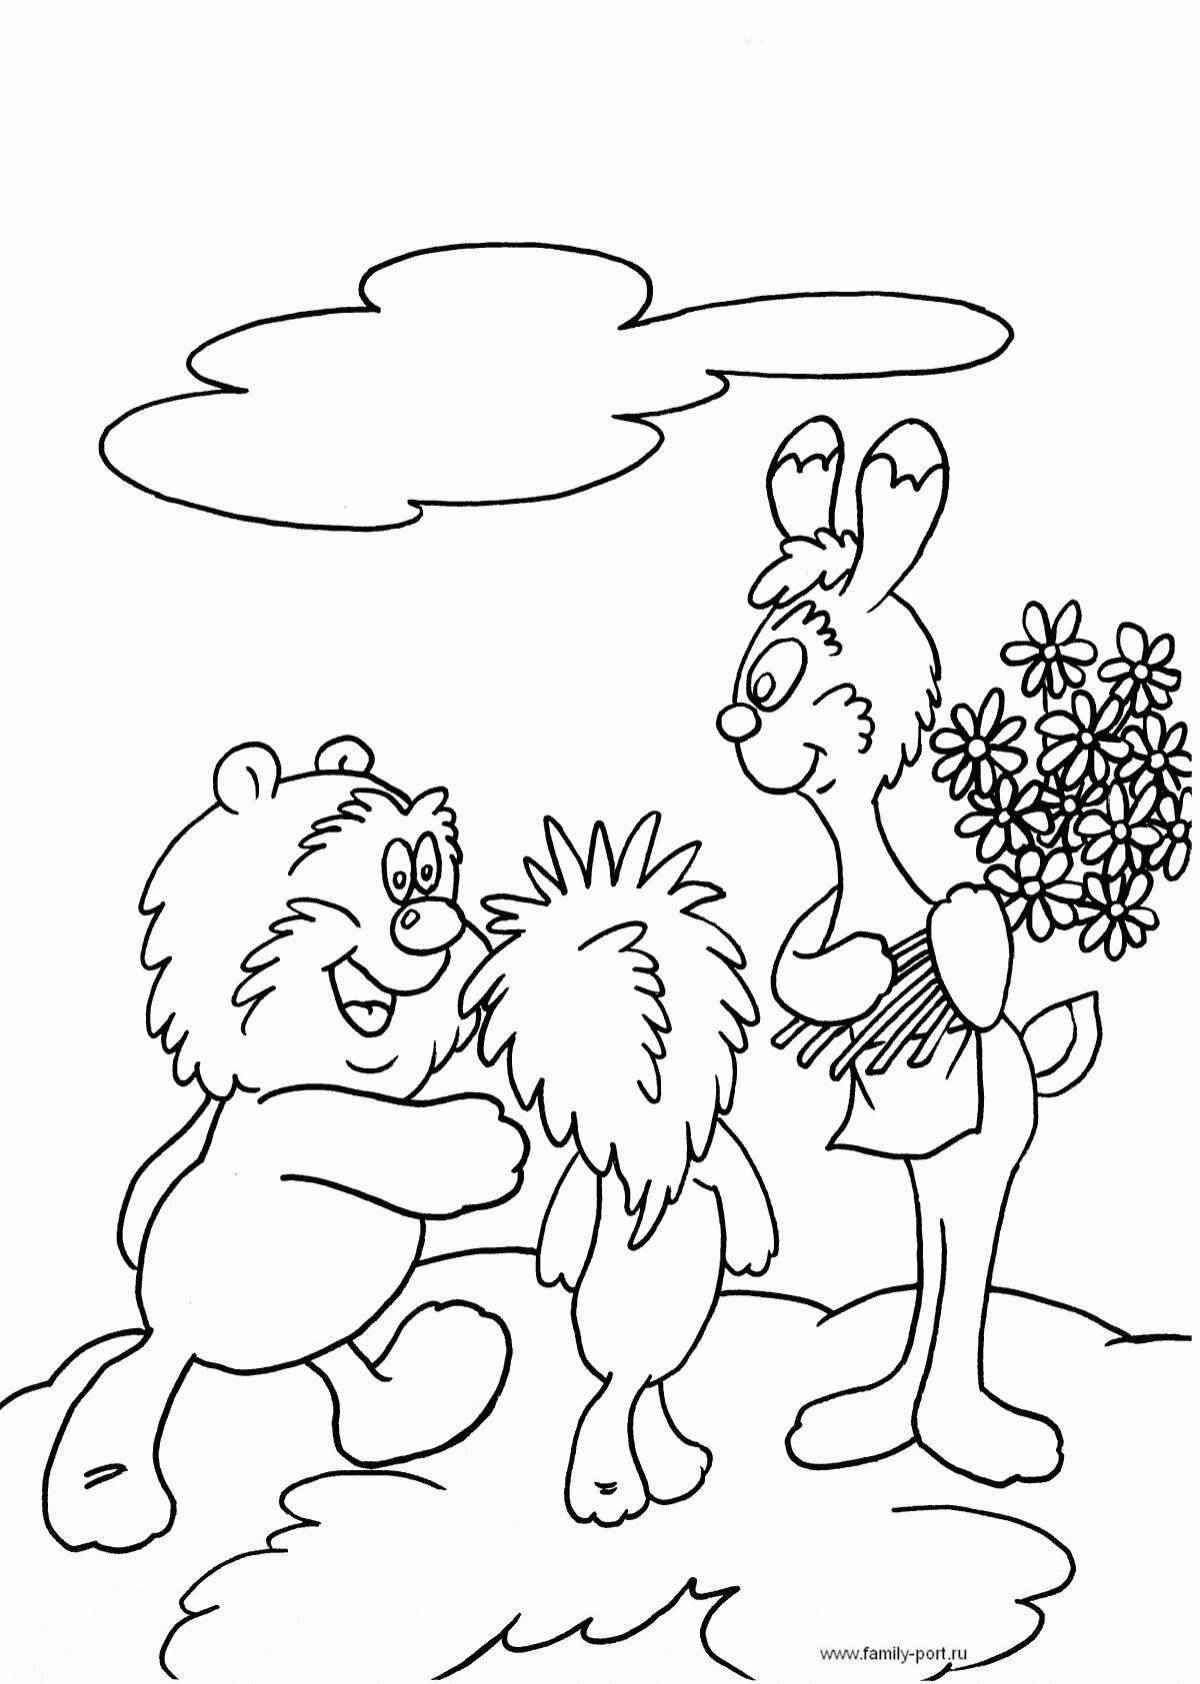 Fun tryam hello coloring page